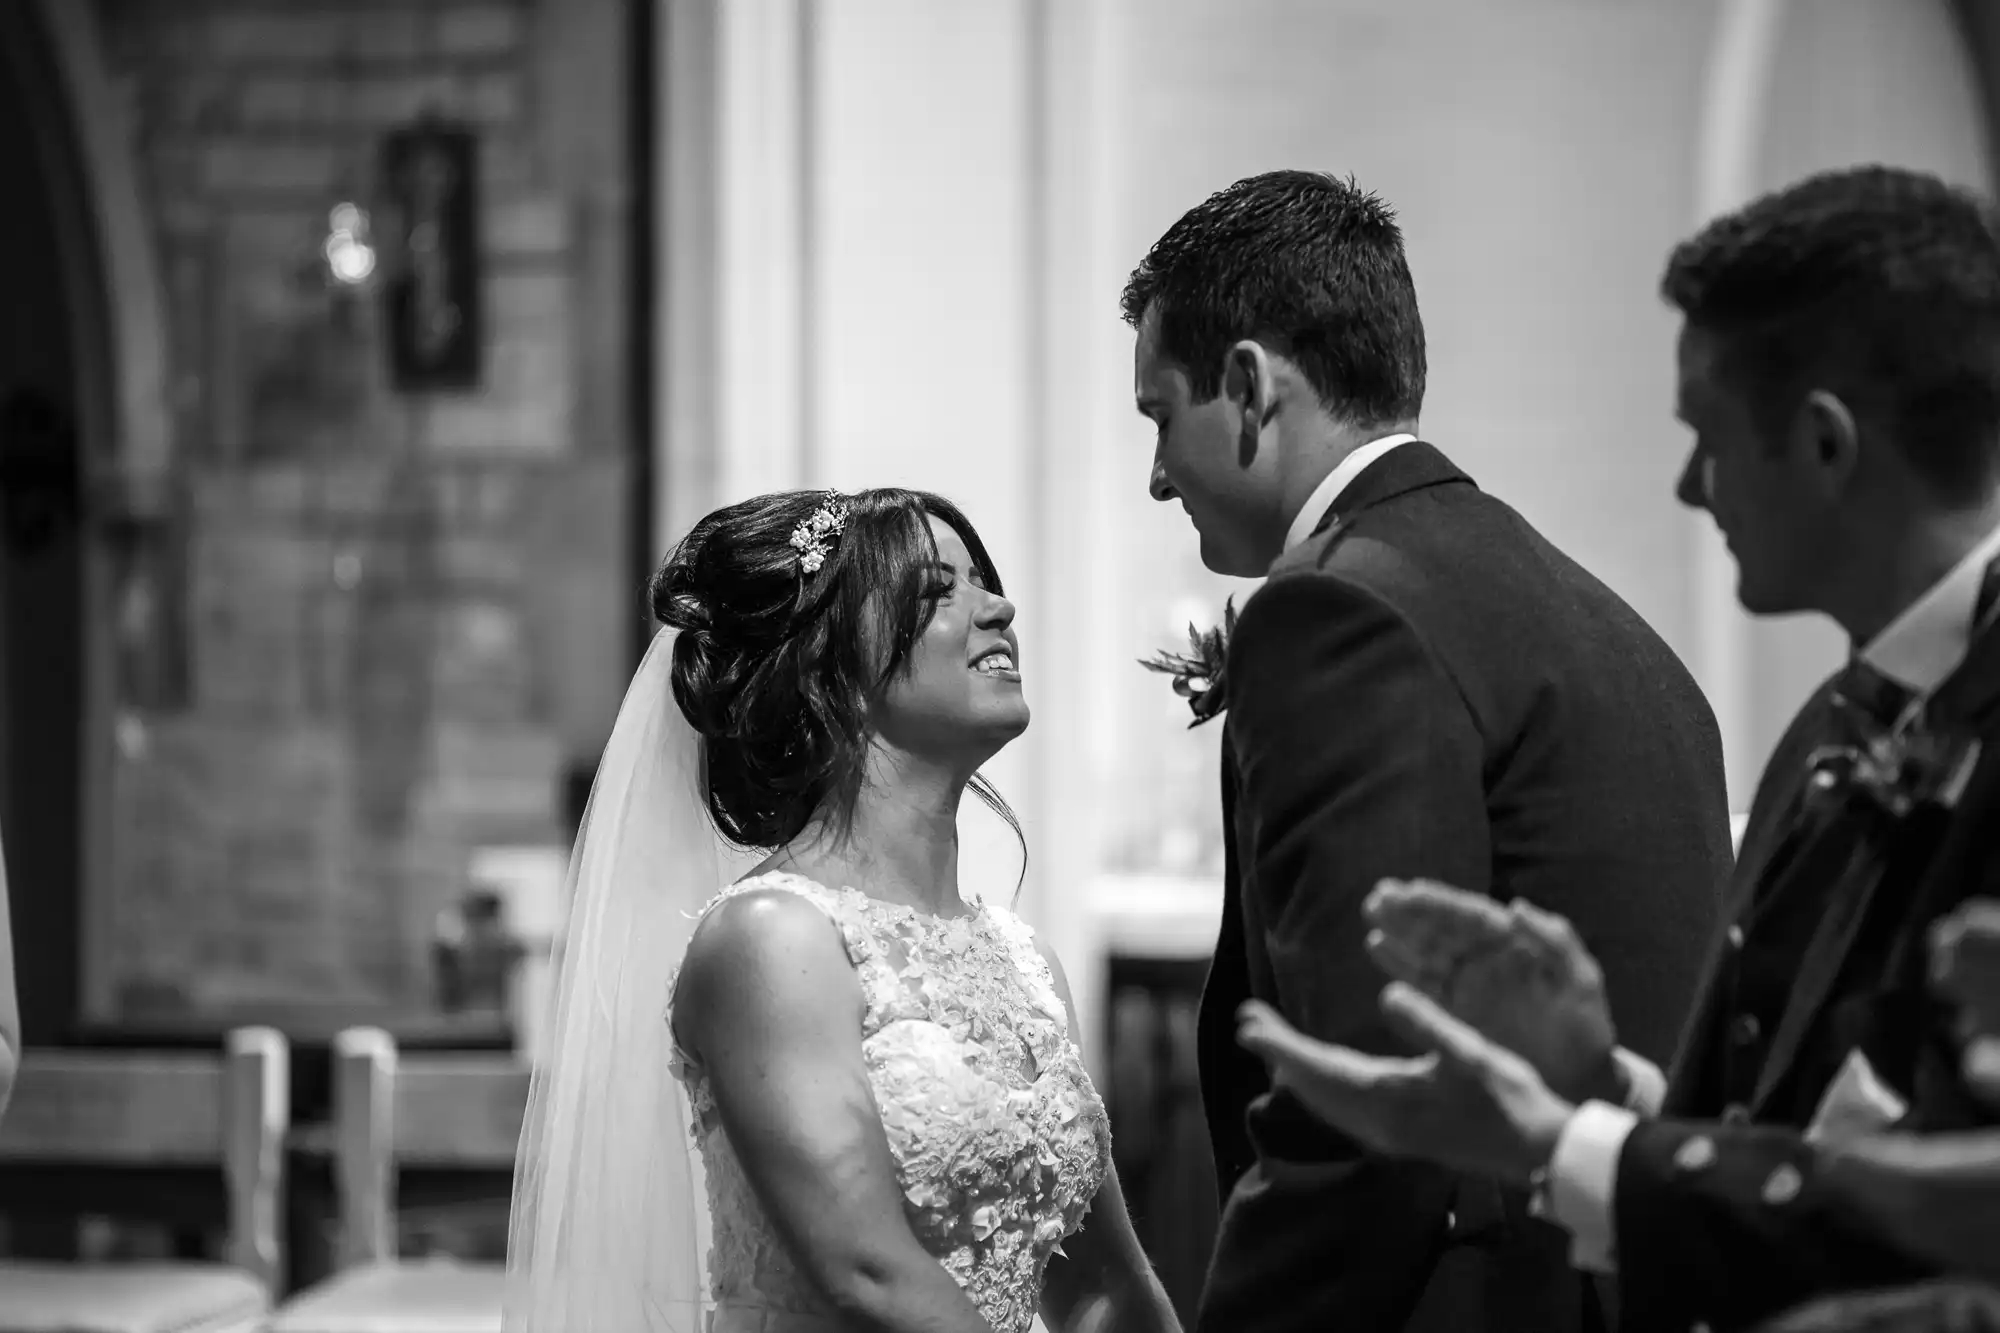 A bride and groom smiling at each other during their wedding ceremony in a church, captured in black and white.